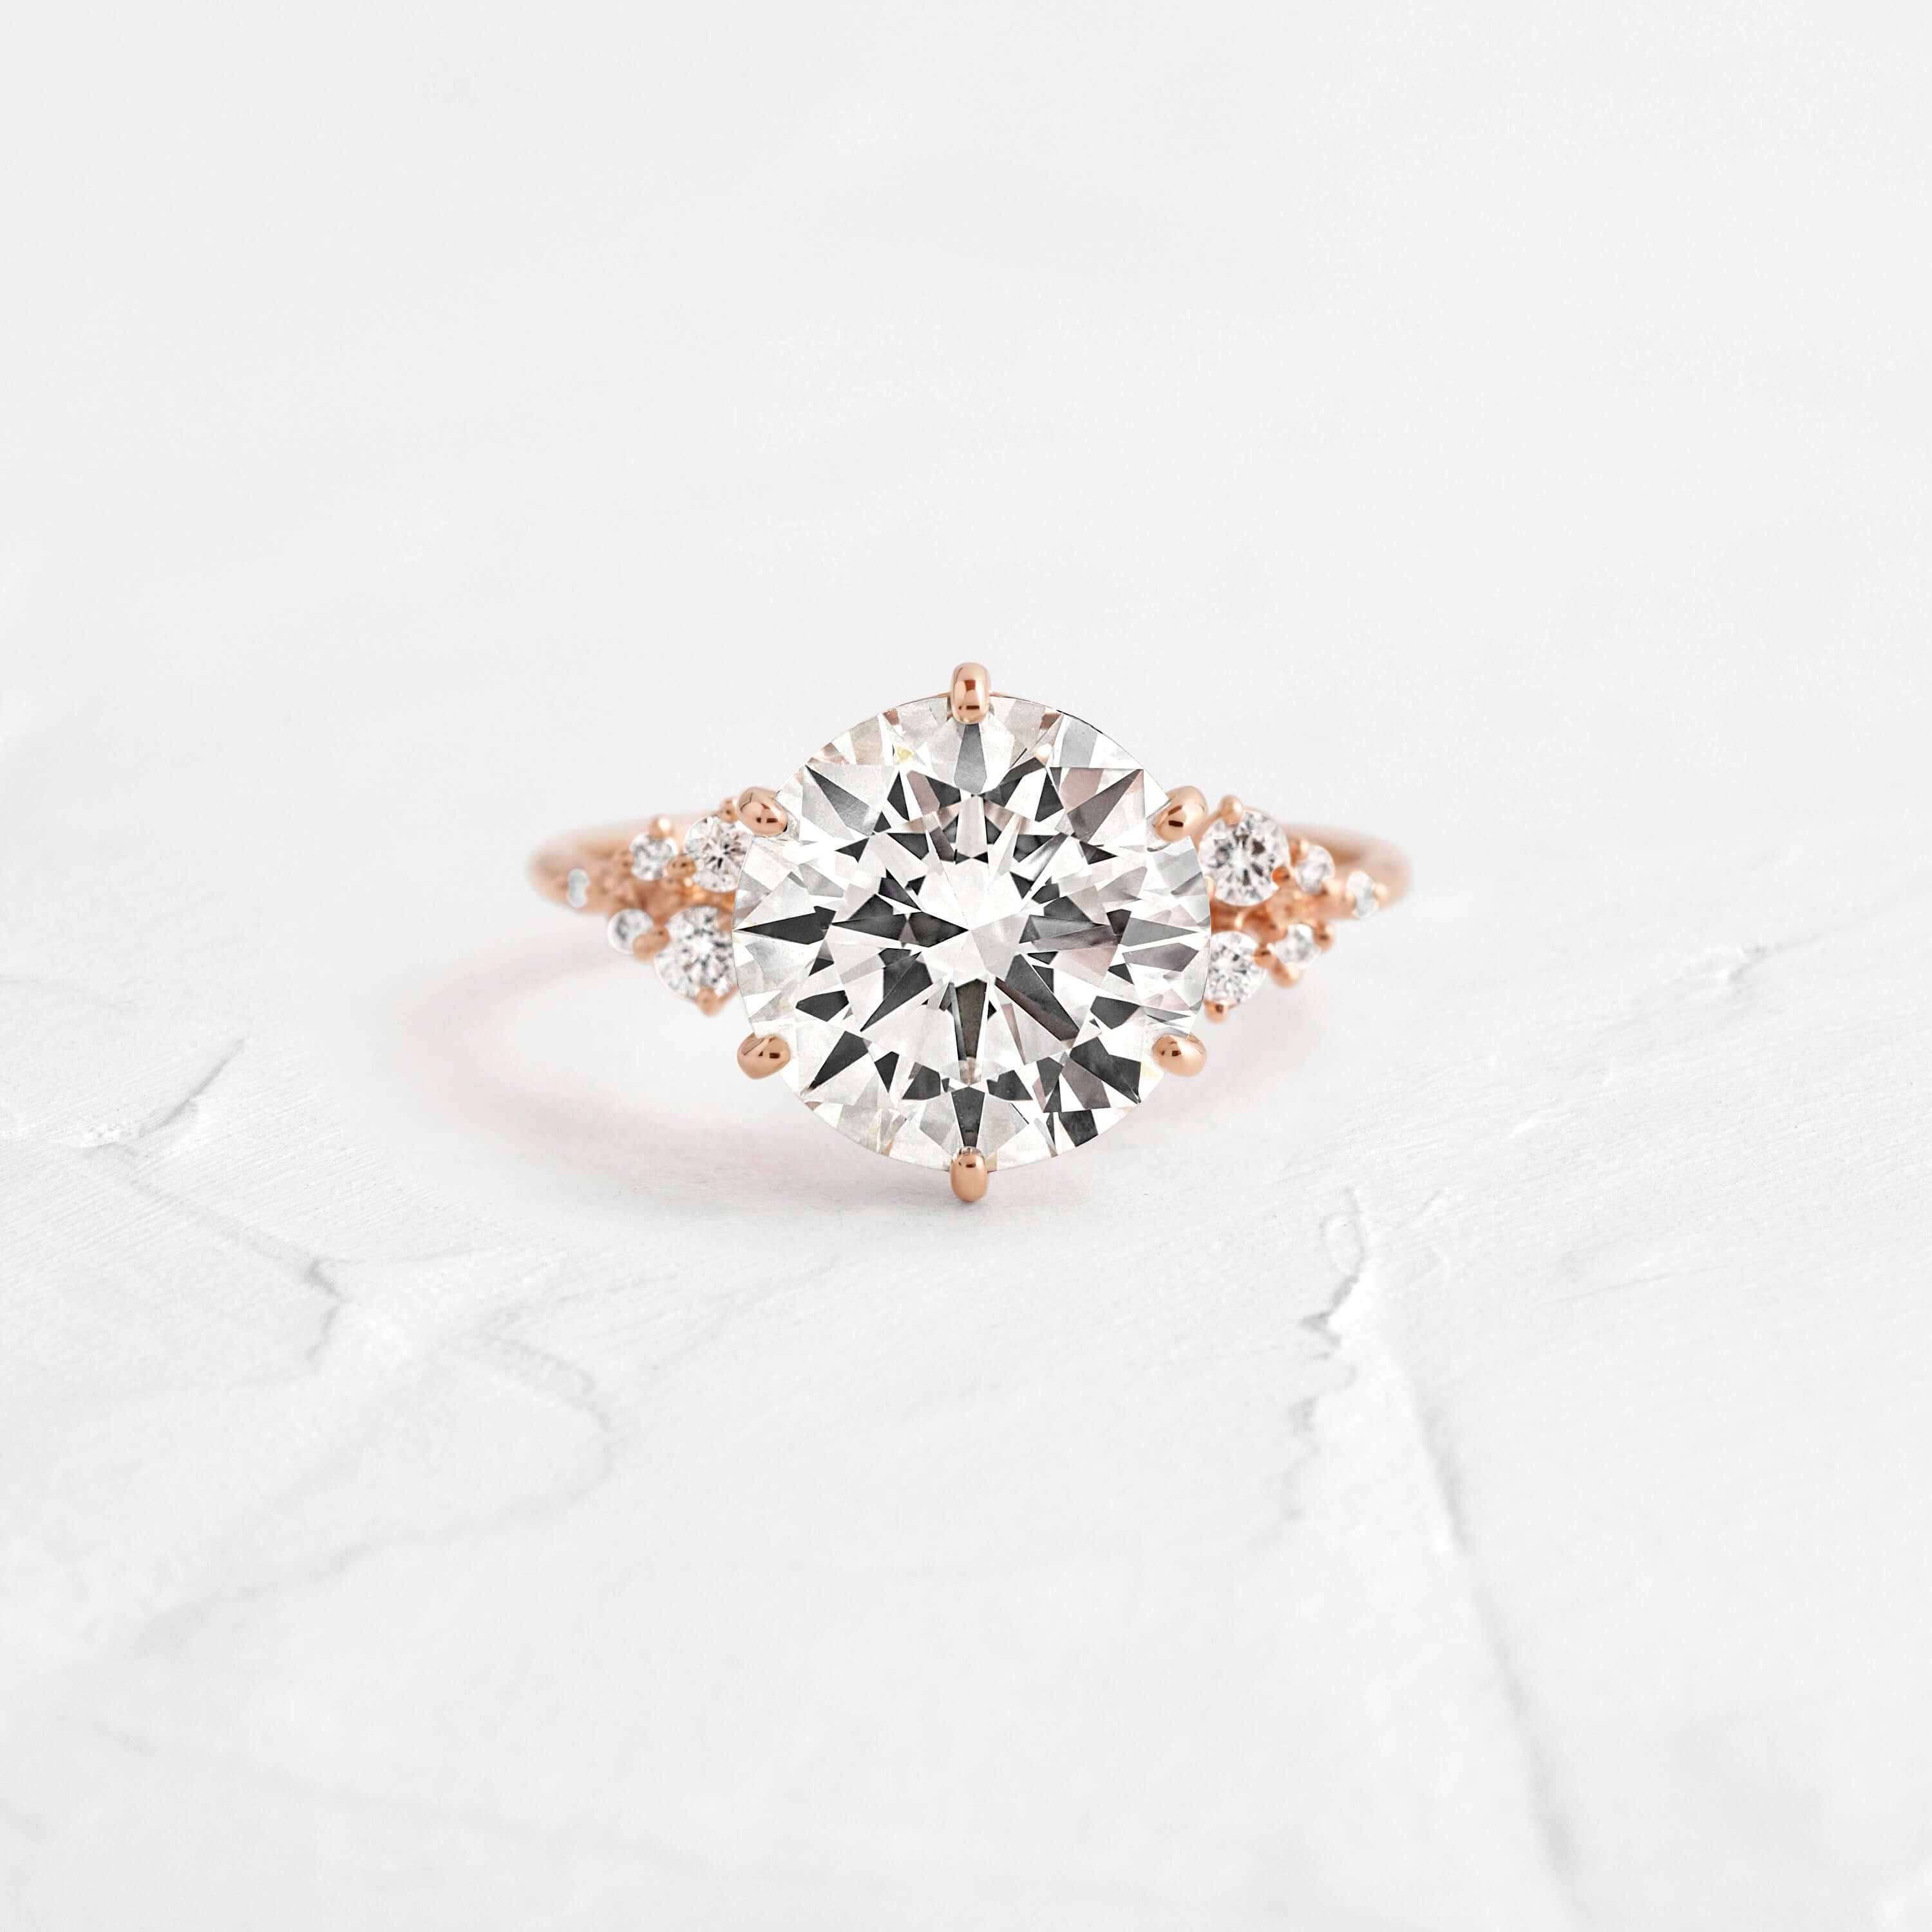 Snowdrift Ring | Handcrafted Engagement Ring | Melanie Casey